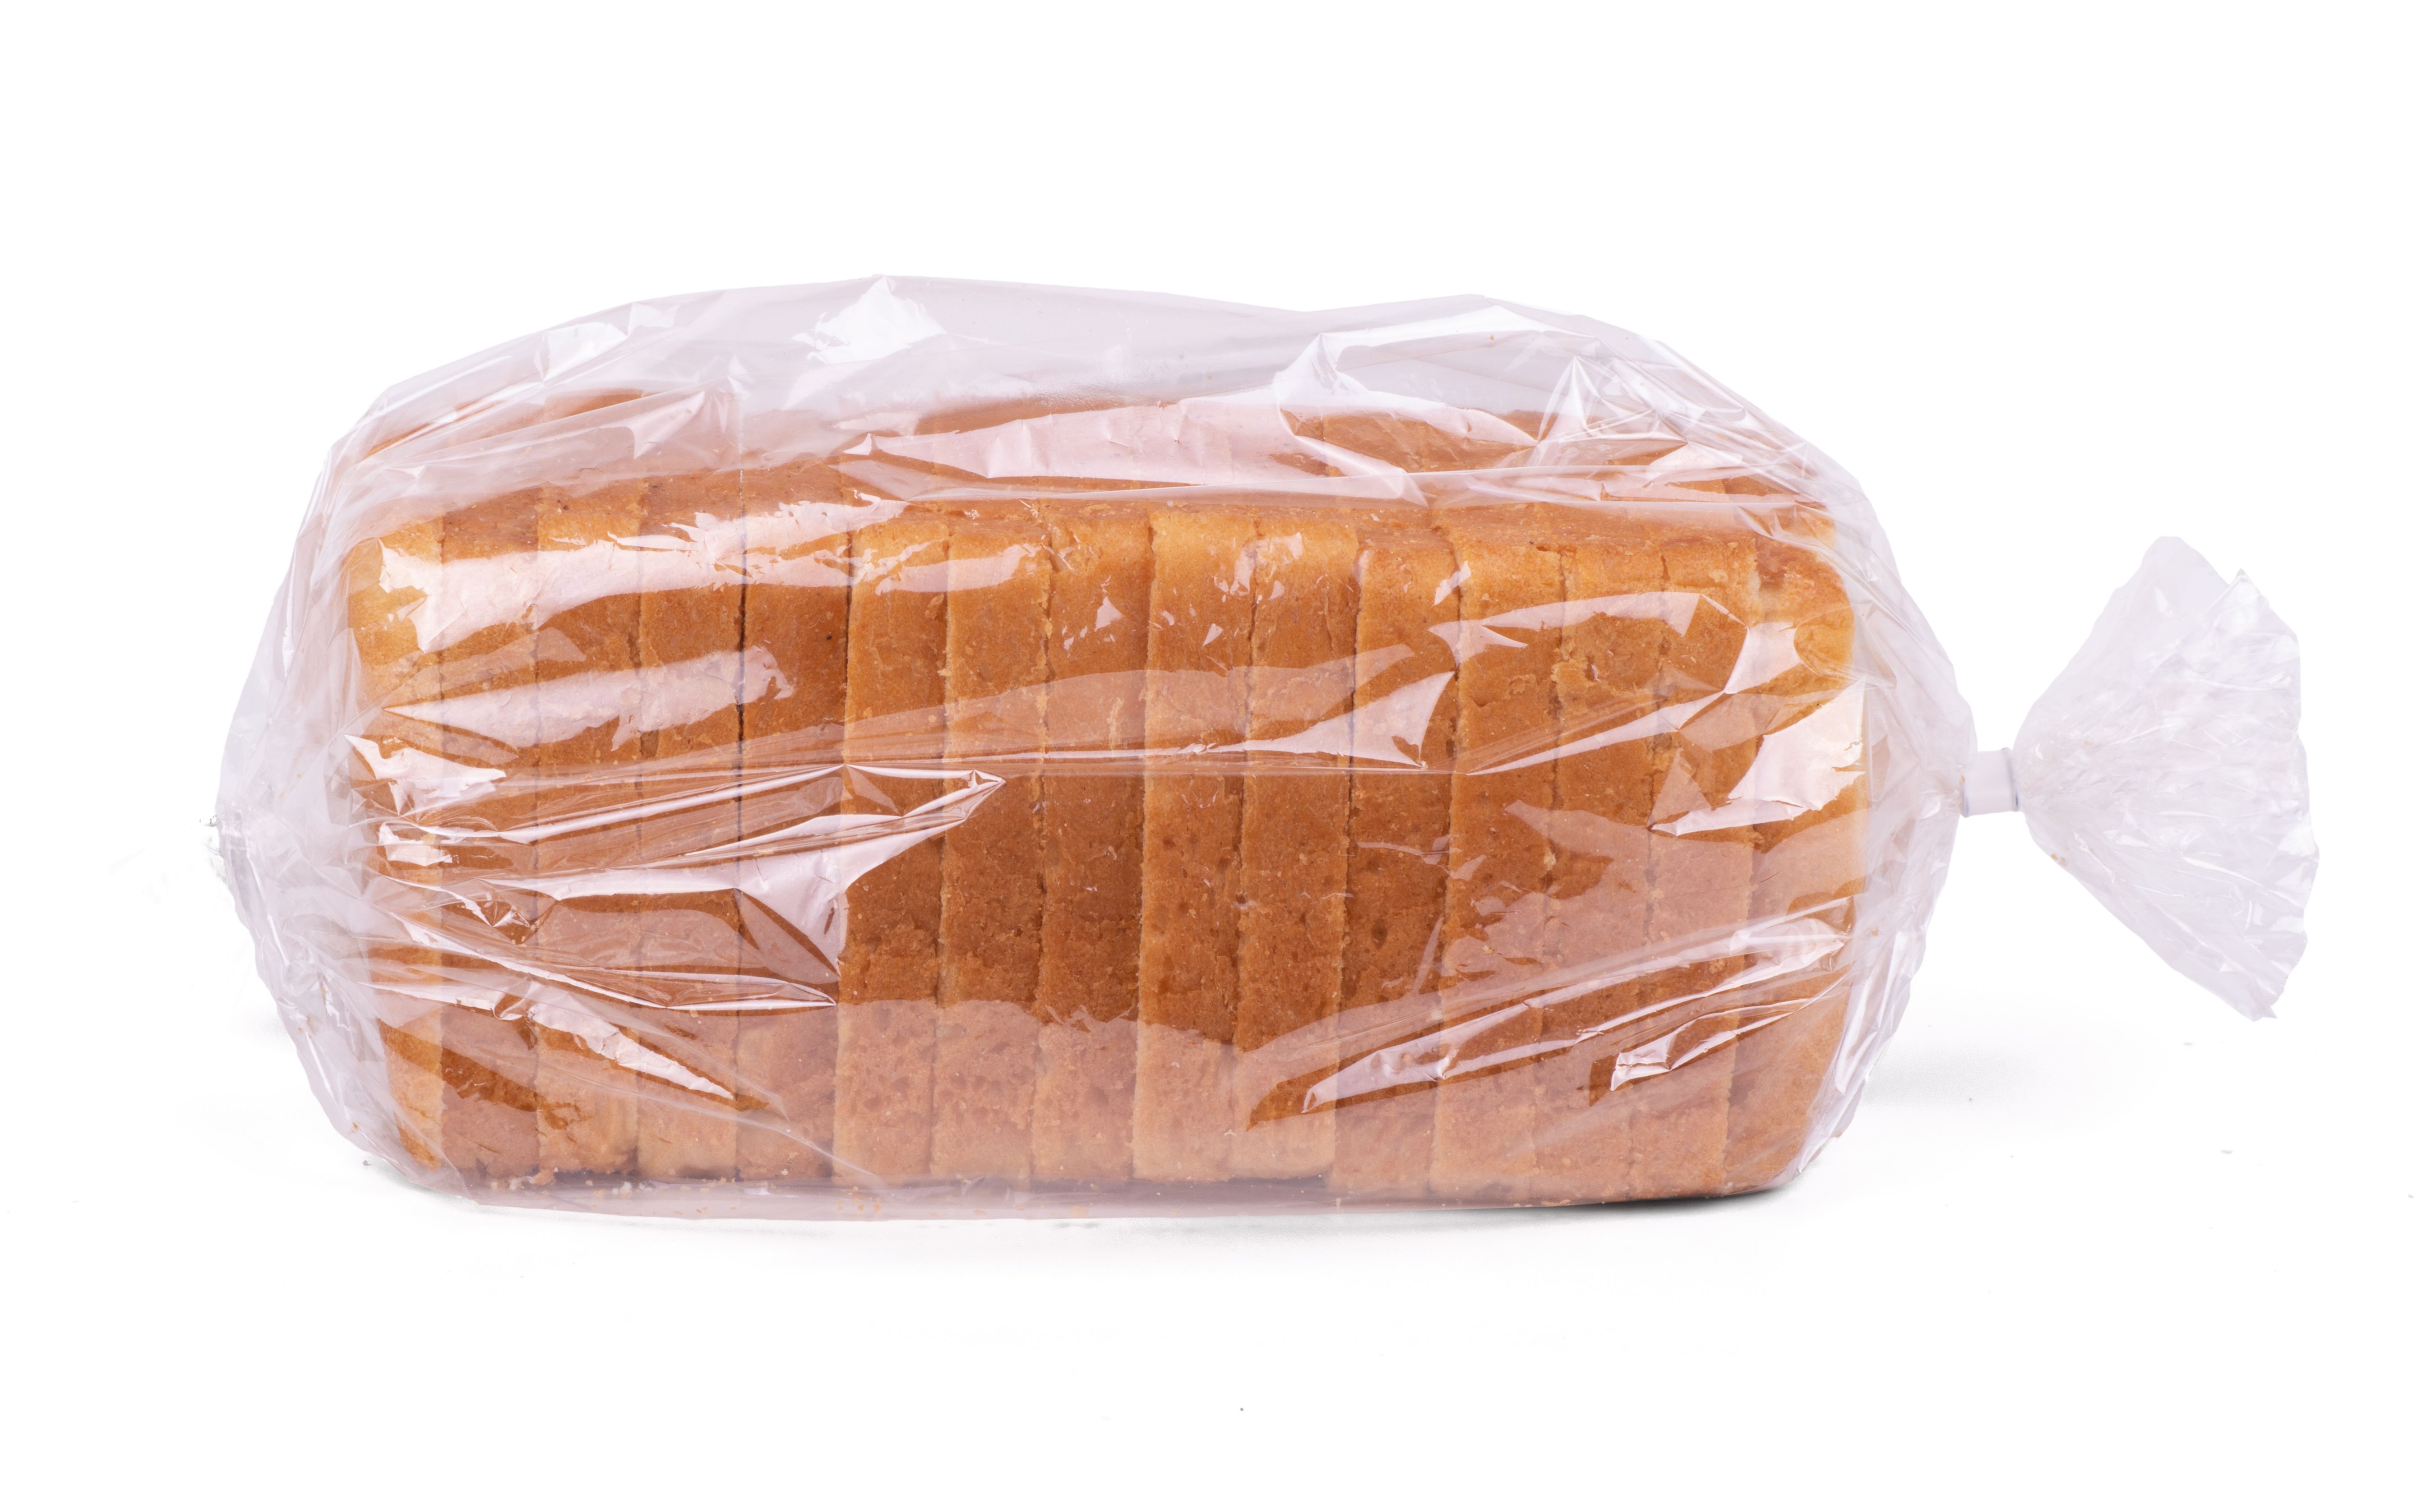 How to Store Bread